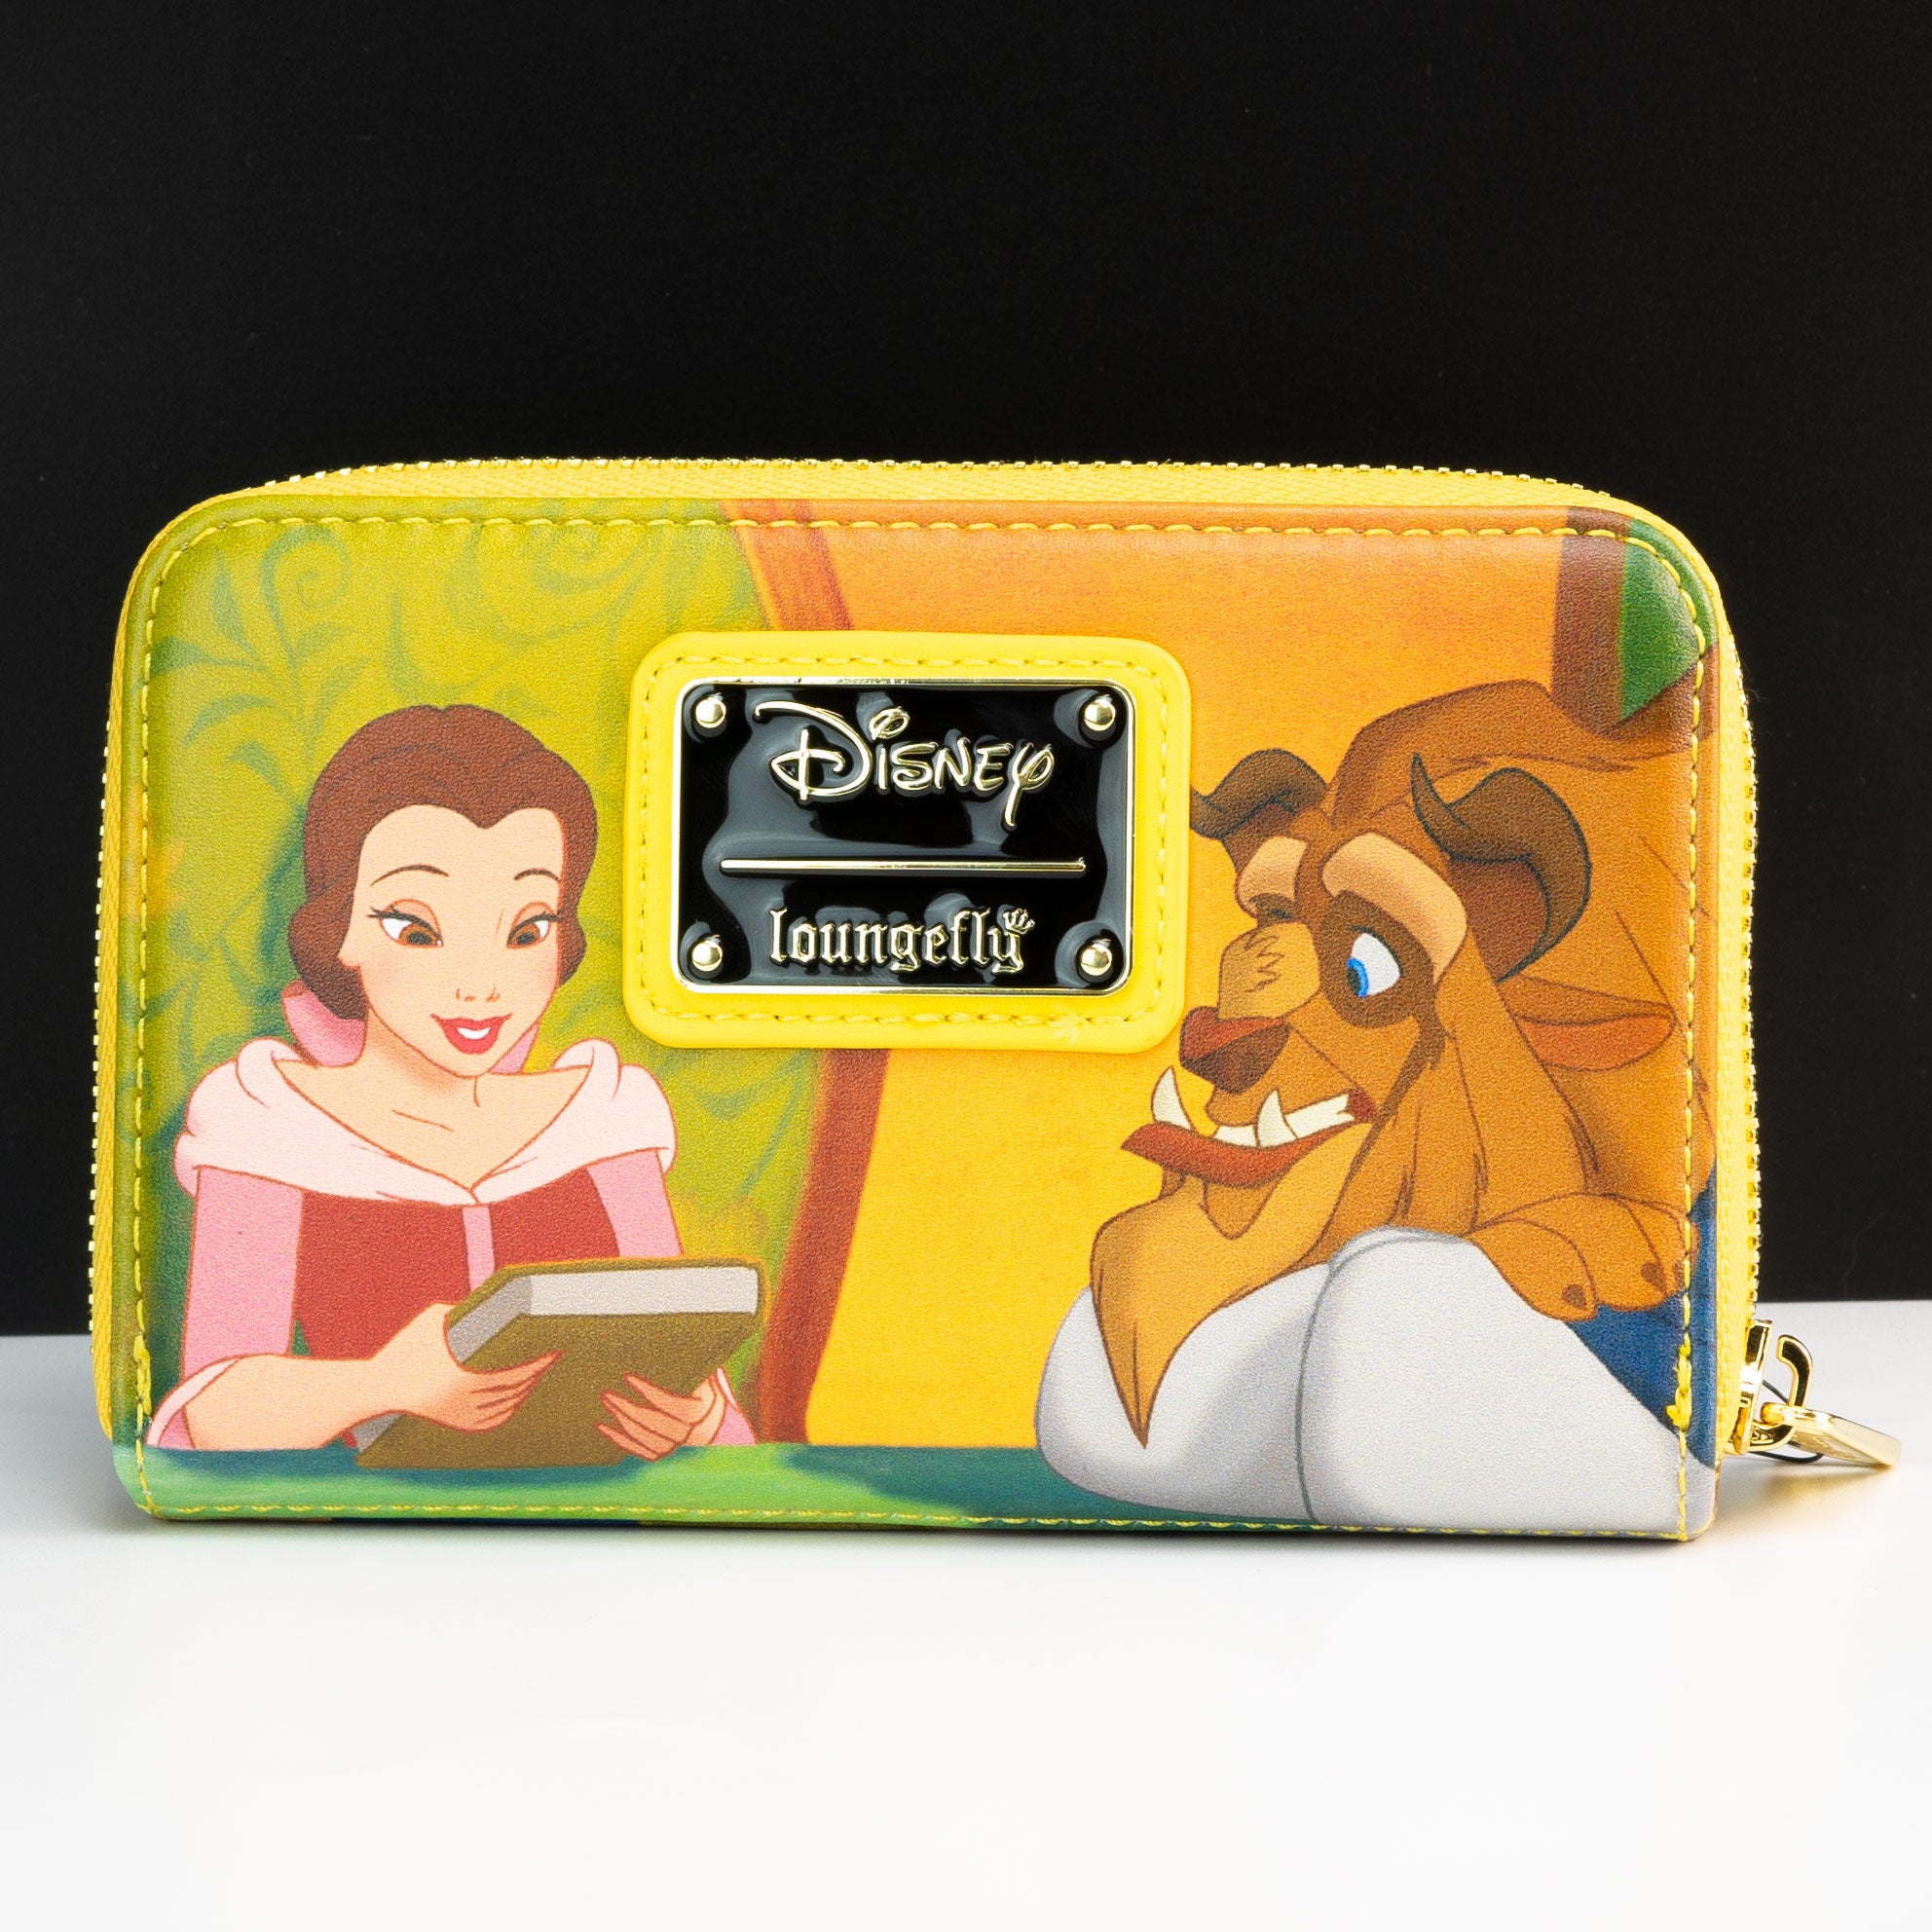 Loungefly x Disney Beauty and The Beast Scenes Purse